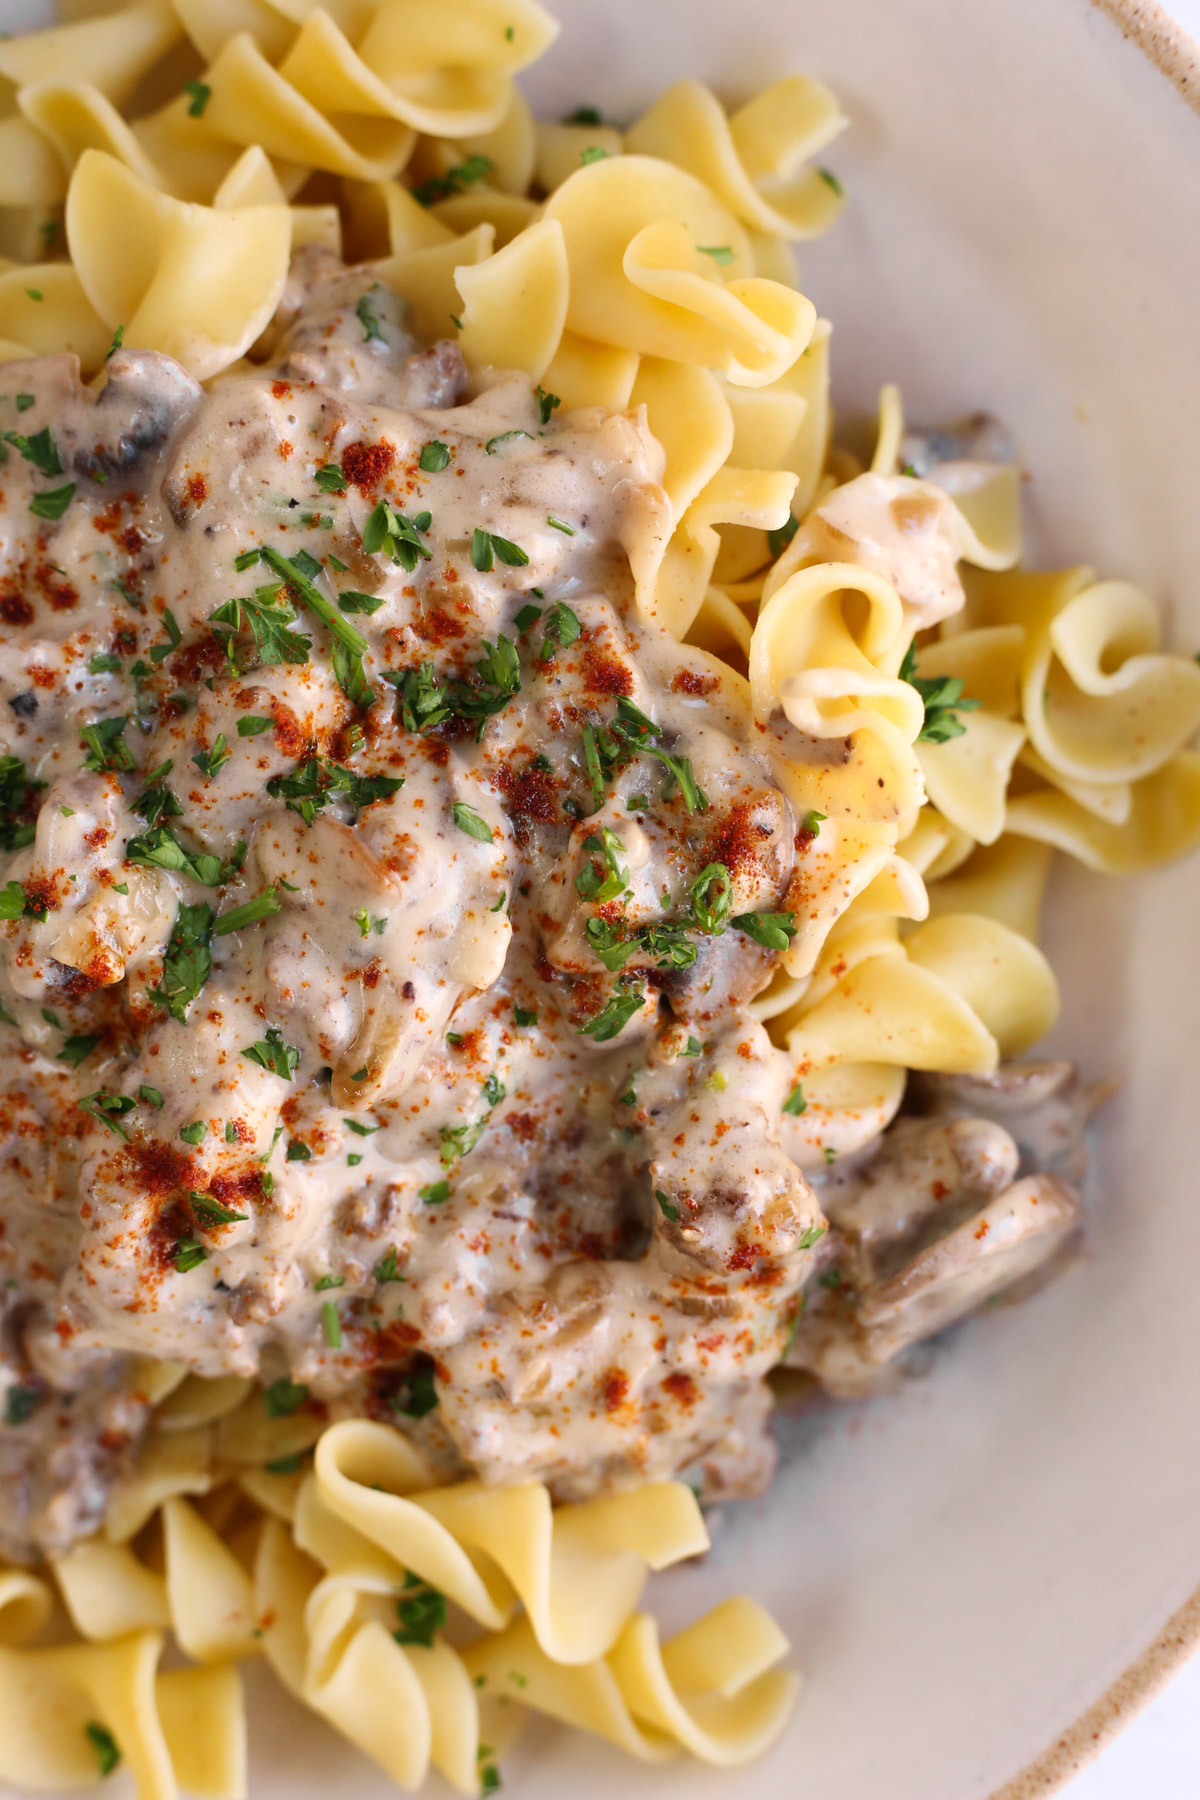 Close up view of a ground beef stroganoff recipe served on top of egg noodles in a ceramic bowl